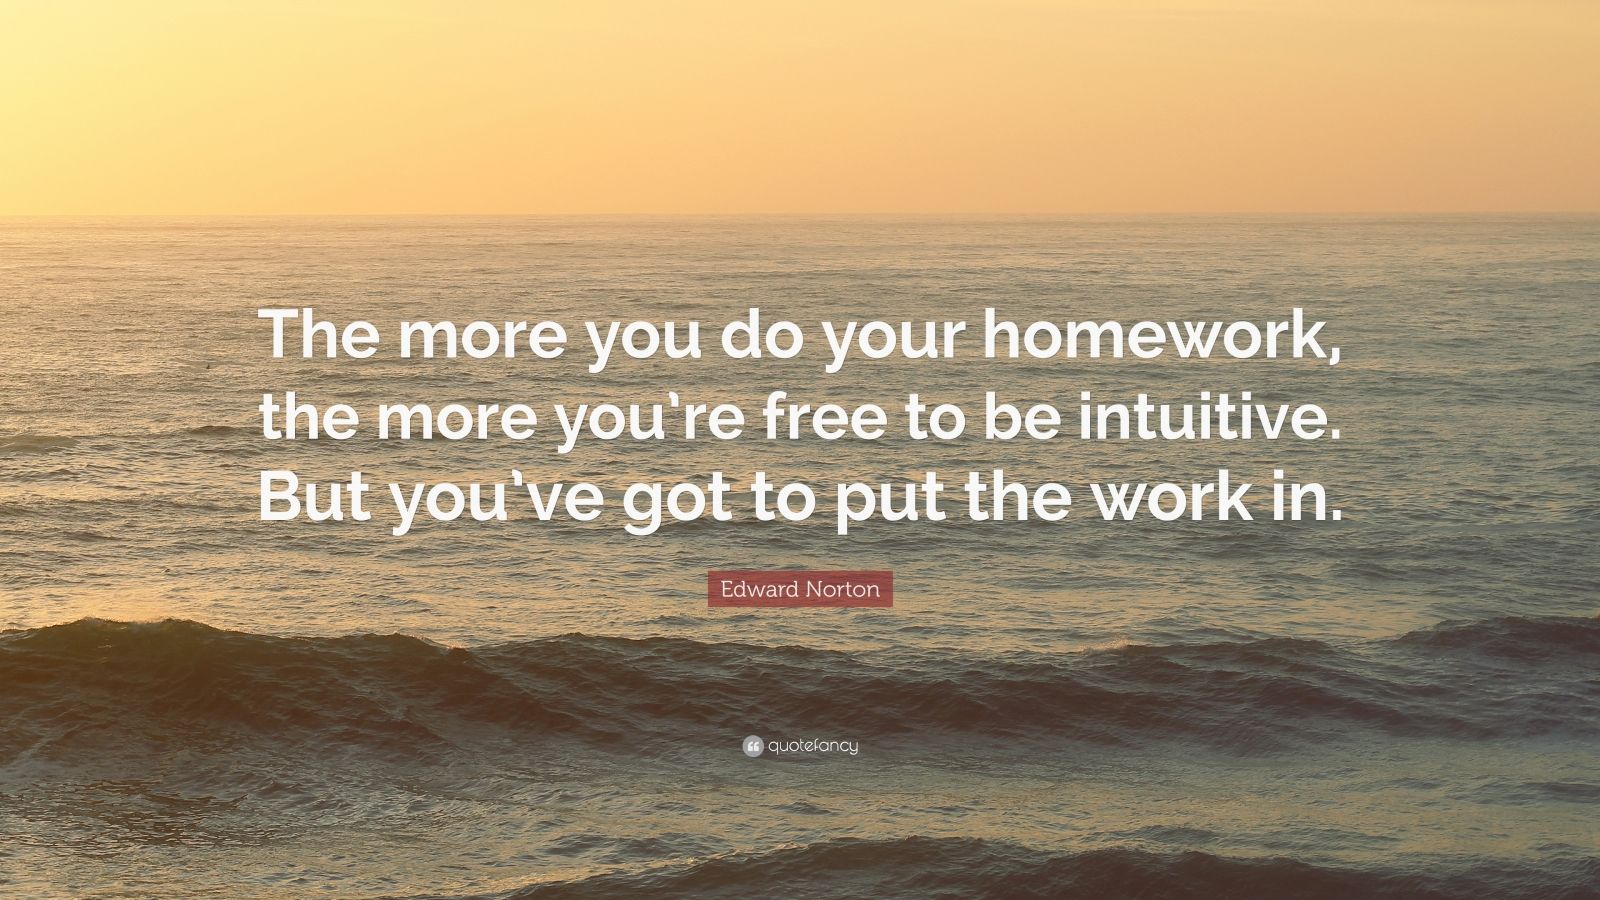 quote supporting homework